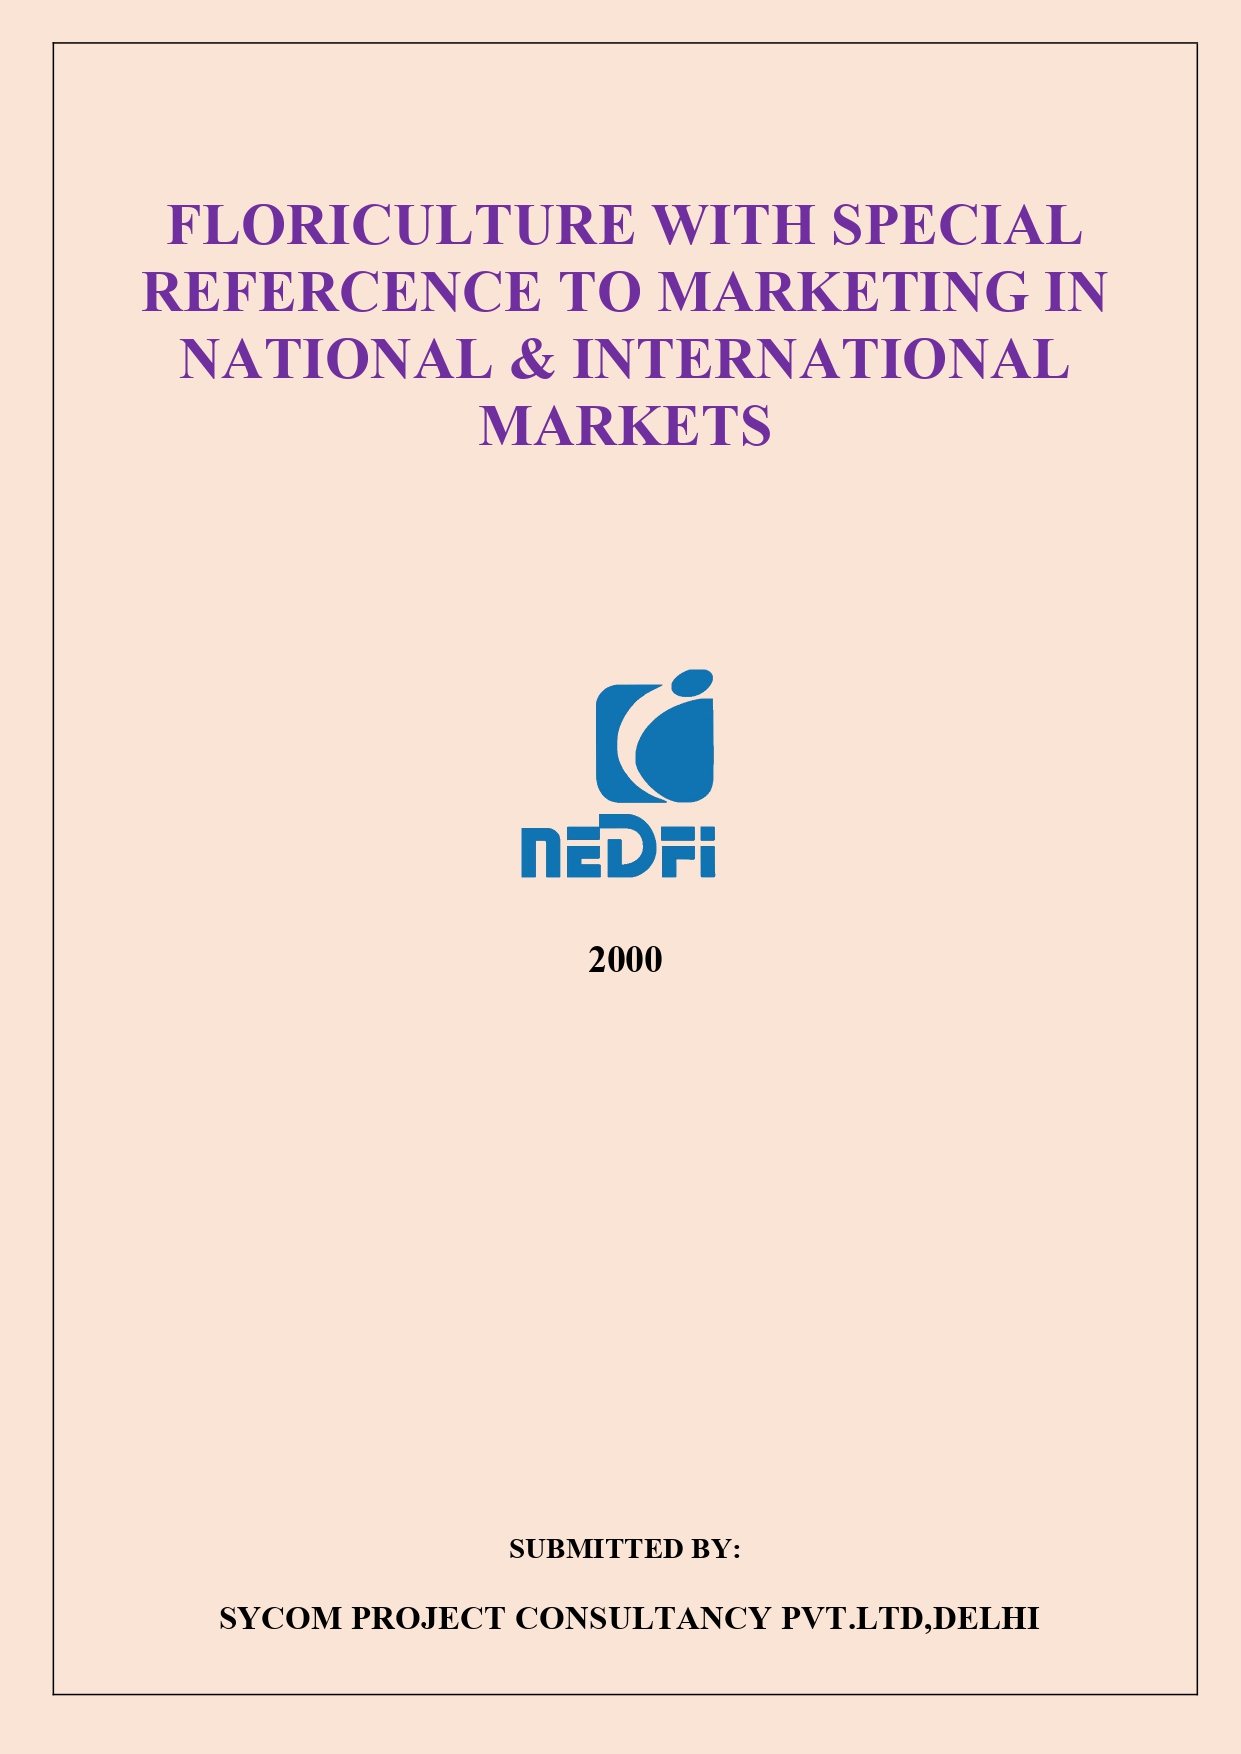 FLORICULTURE WITH SPECIAL REFERENCE TO MARKETING IN NATIONAL & INTERNATIONAL MARKETS